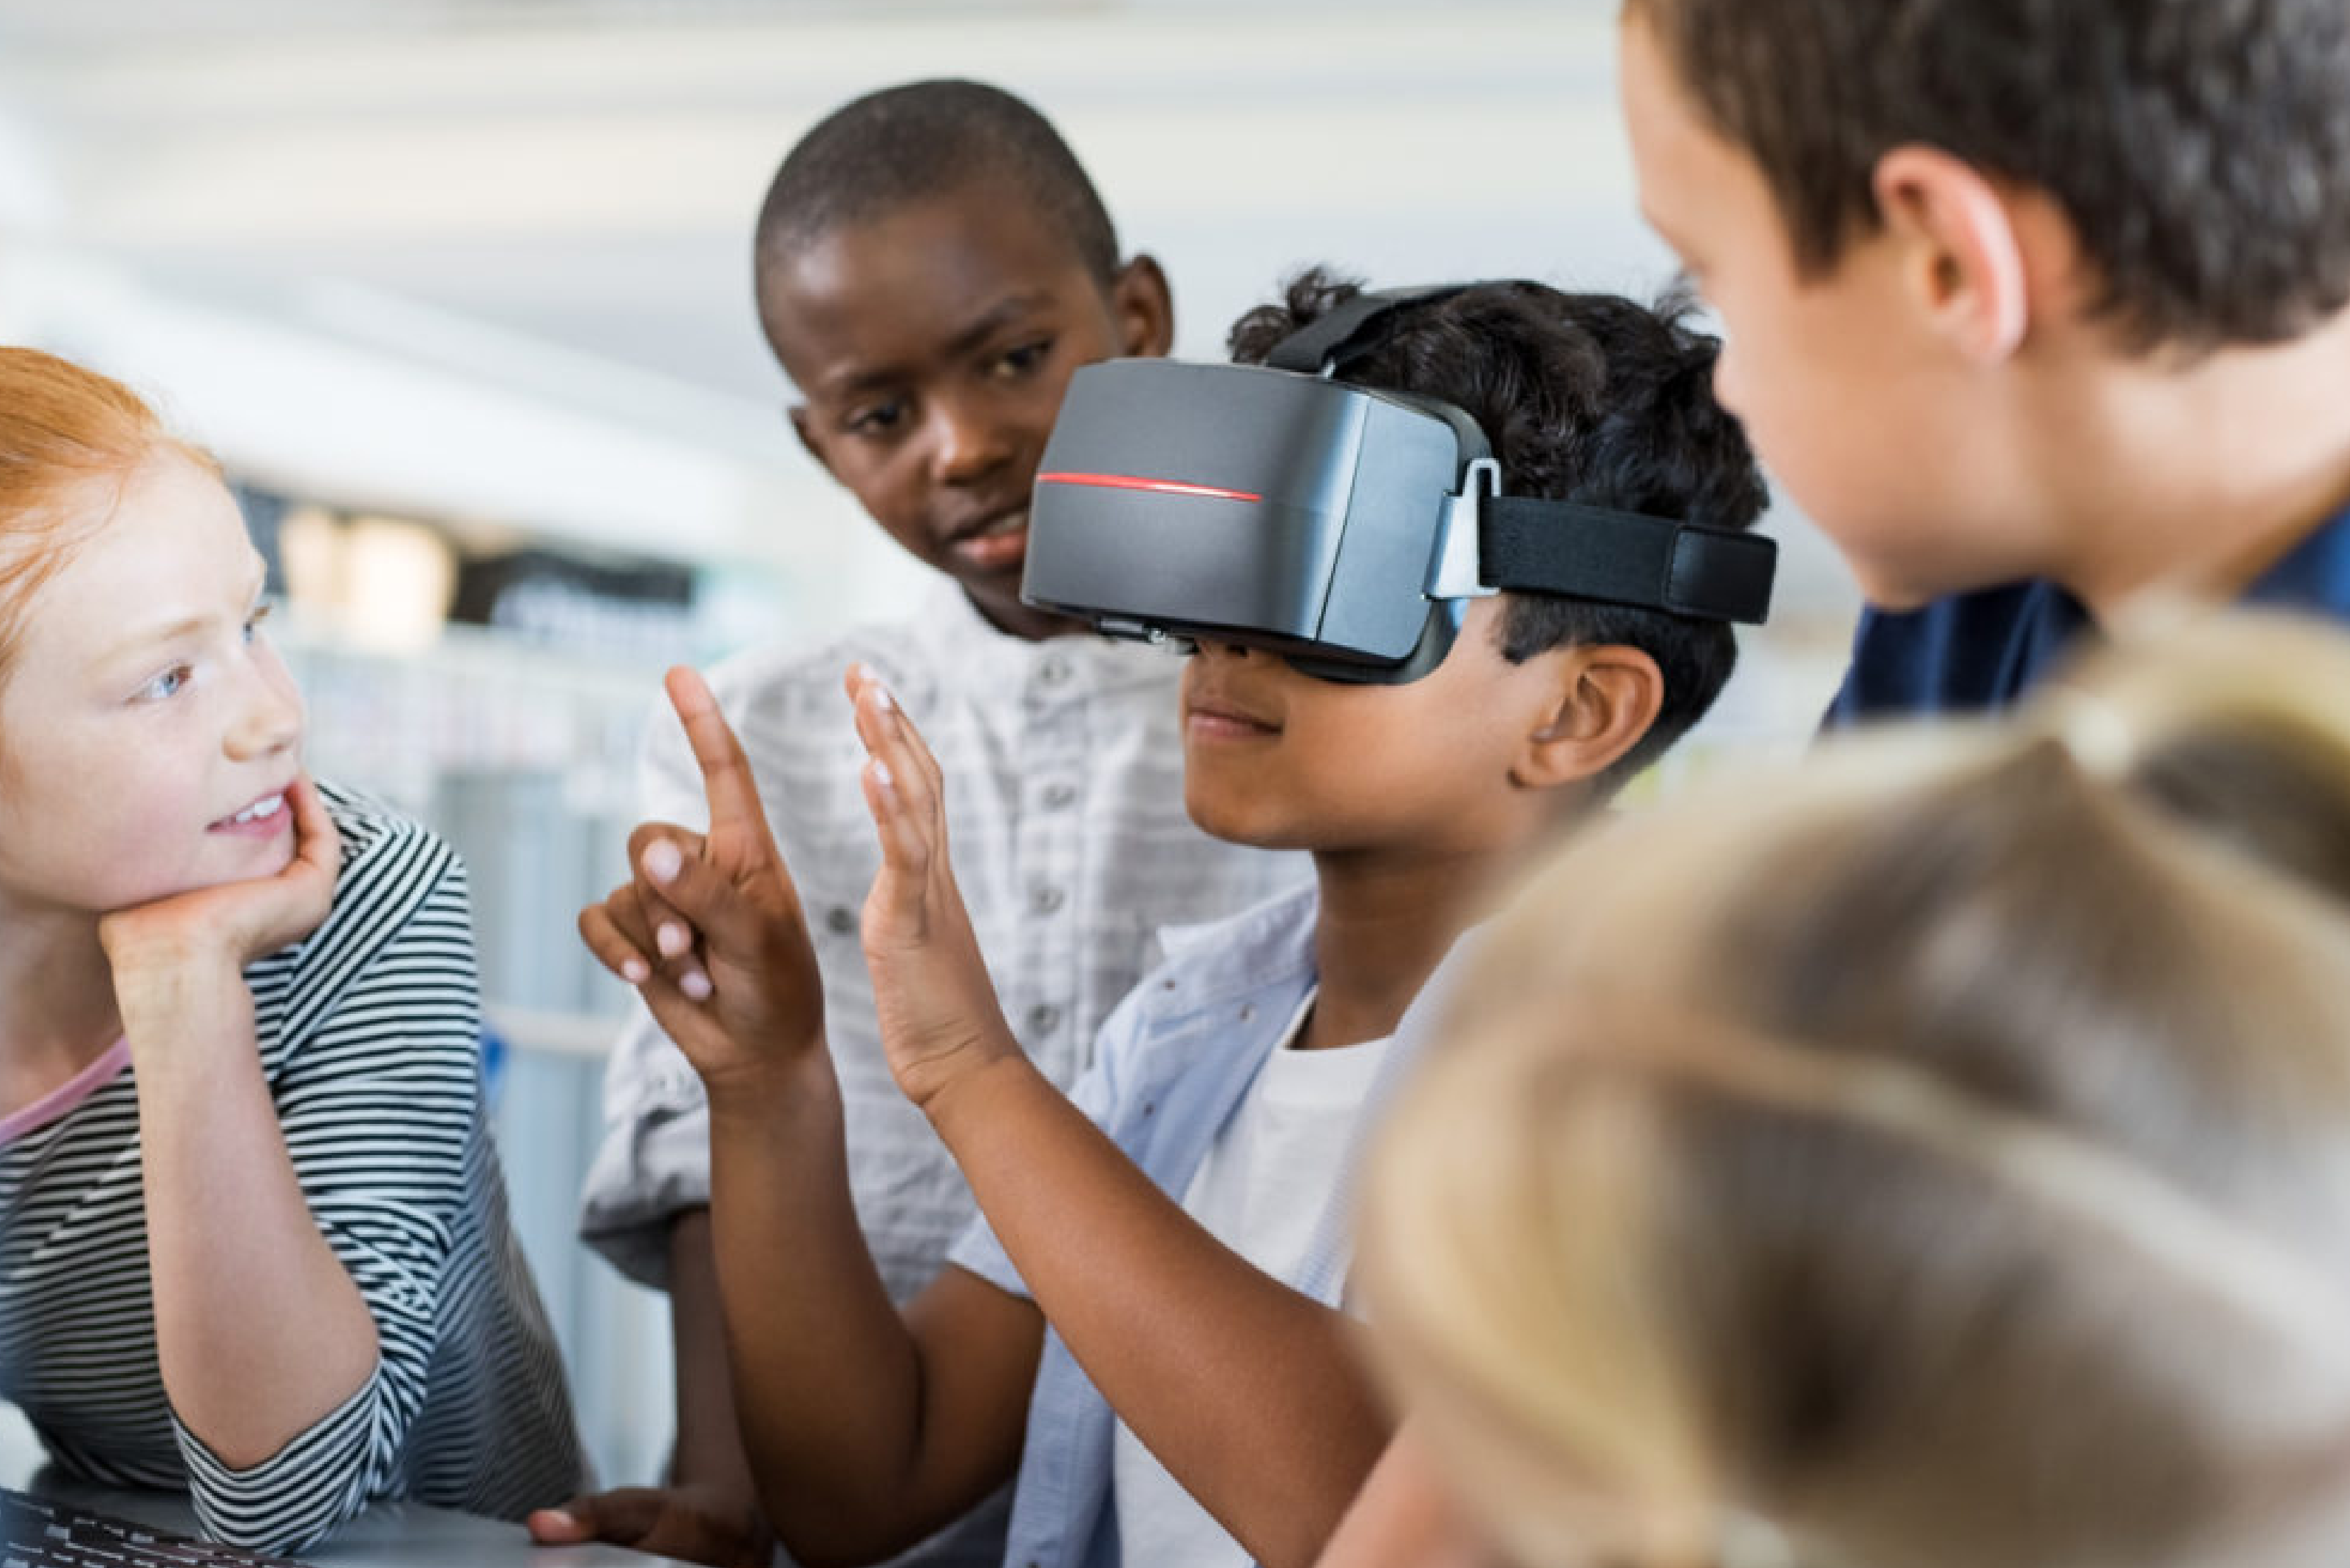 Ensuring equitable access to AR/VR in higher education